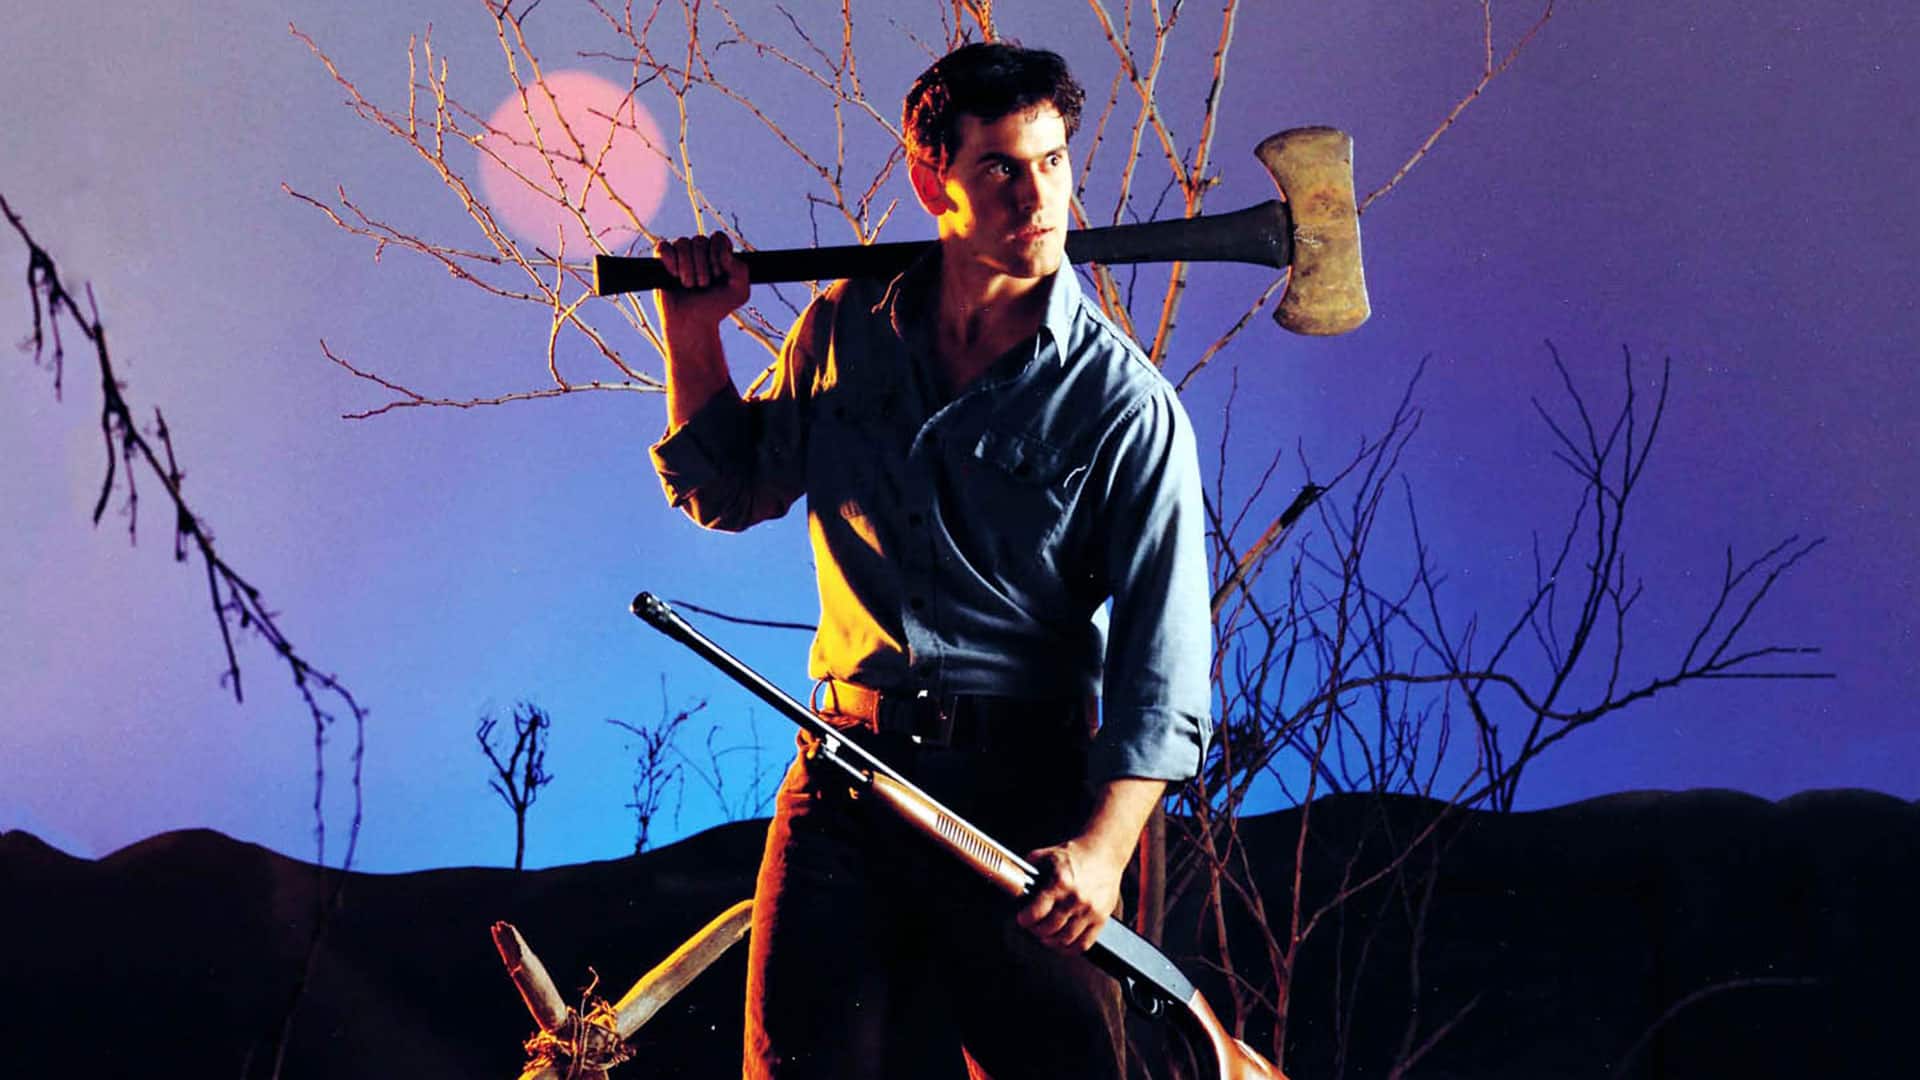 Read more about the article Grindhouse Releasing is bringing Sam Raimi’s EVIL DEAD to theaters for the first time in 4K with a terrifying new soundtrack!